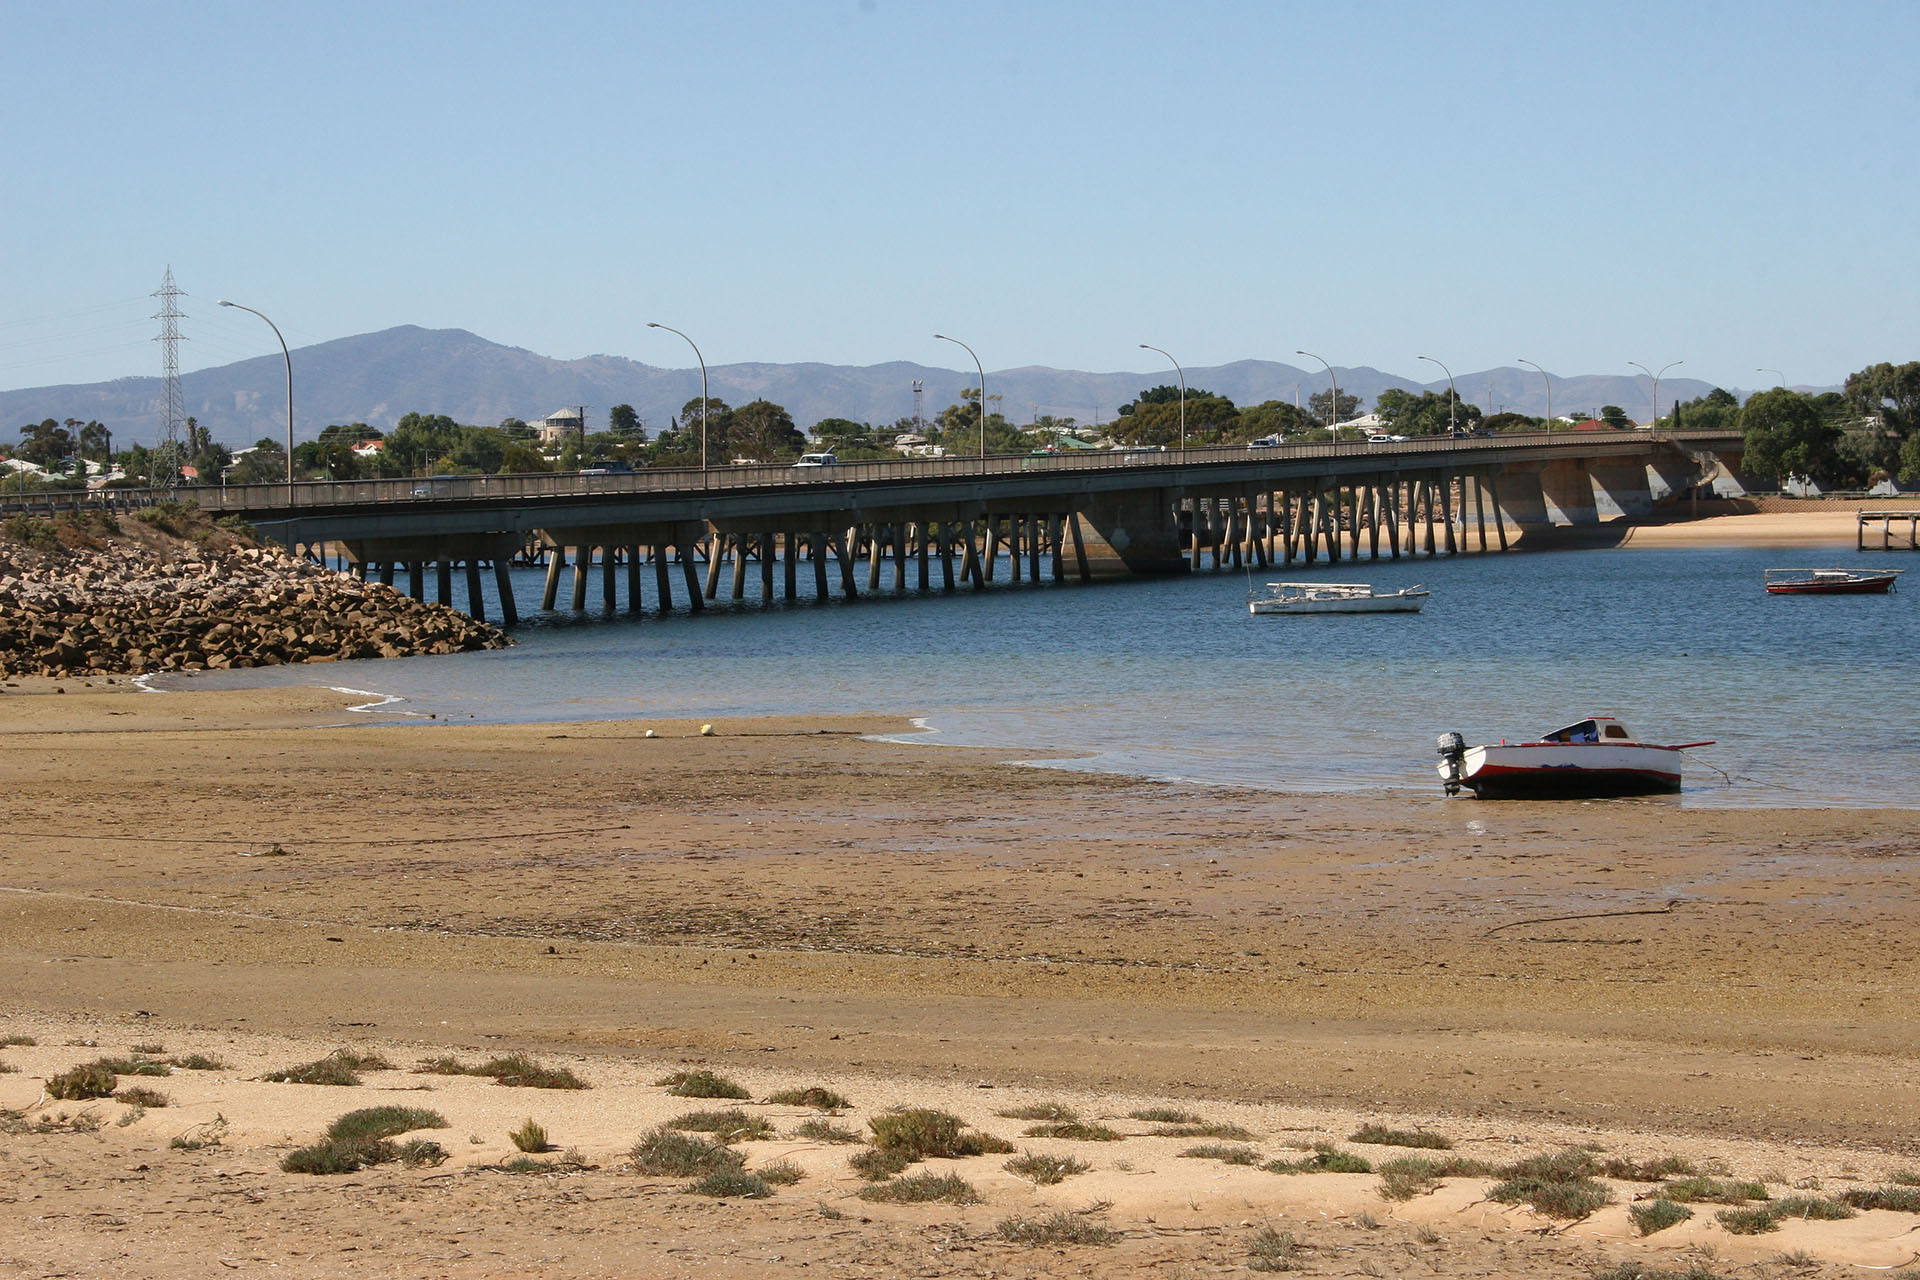 A bridge across the Spencer Gulf in Port Augusta. Adelaide is on the other side now.